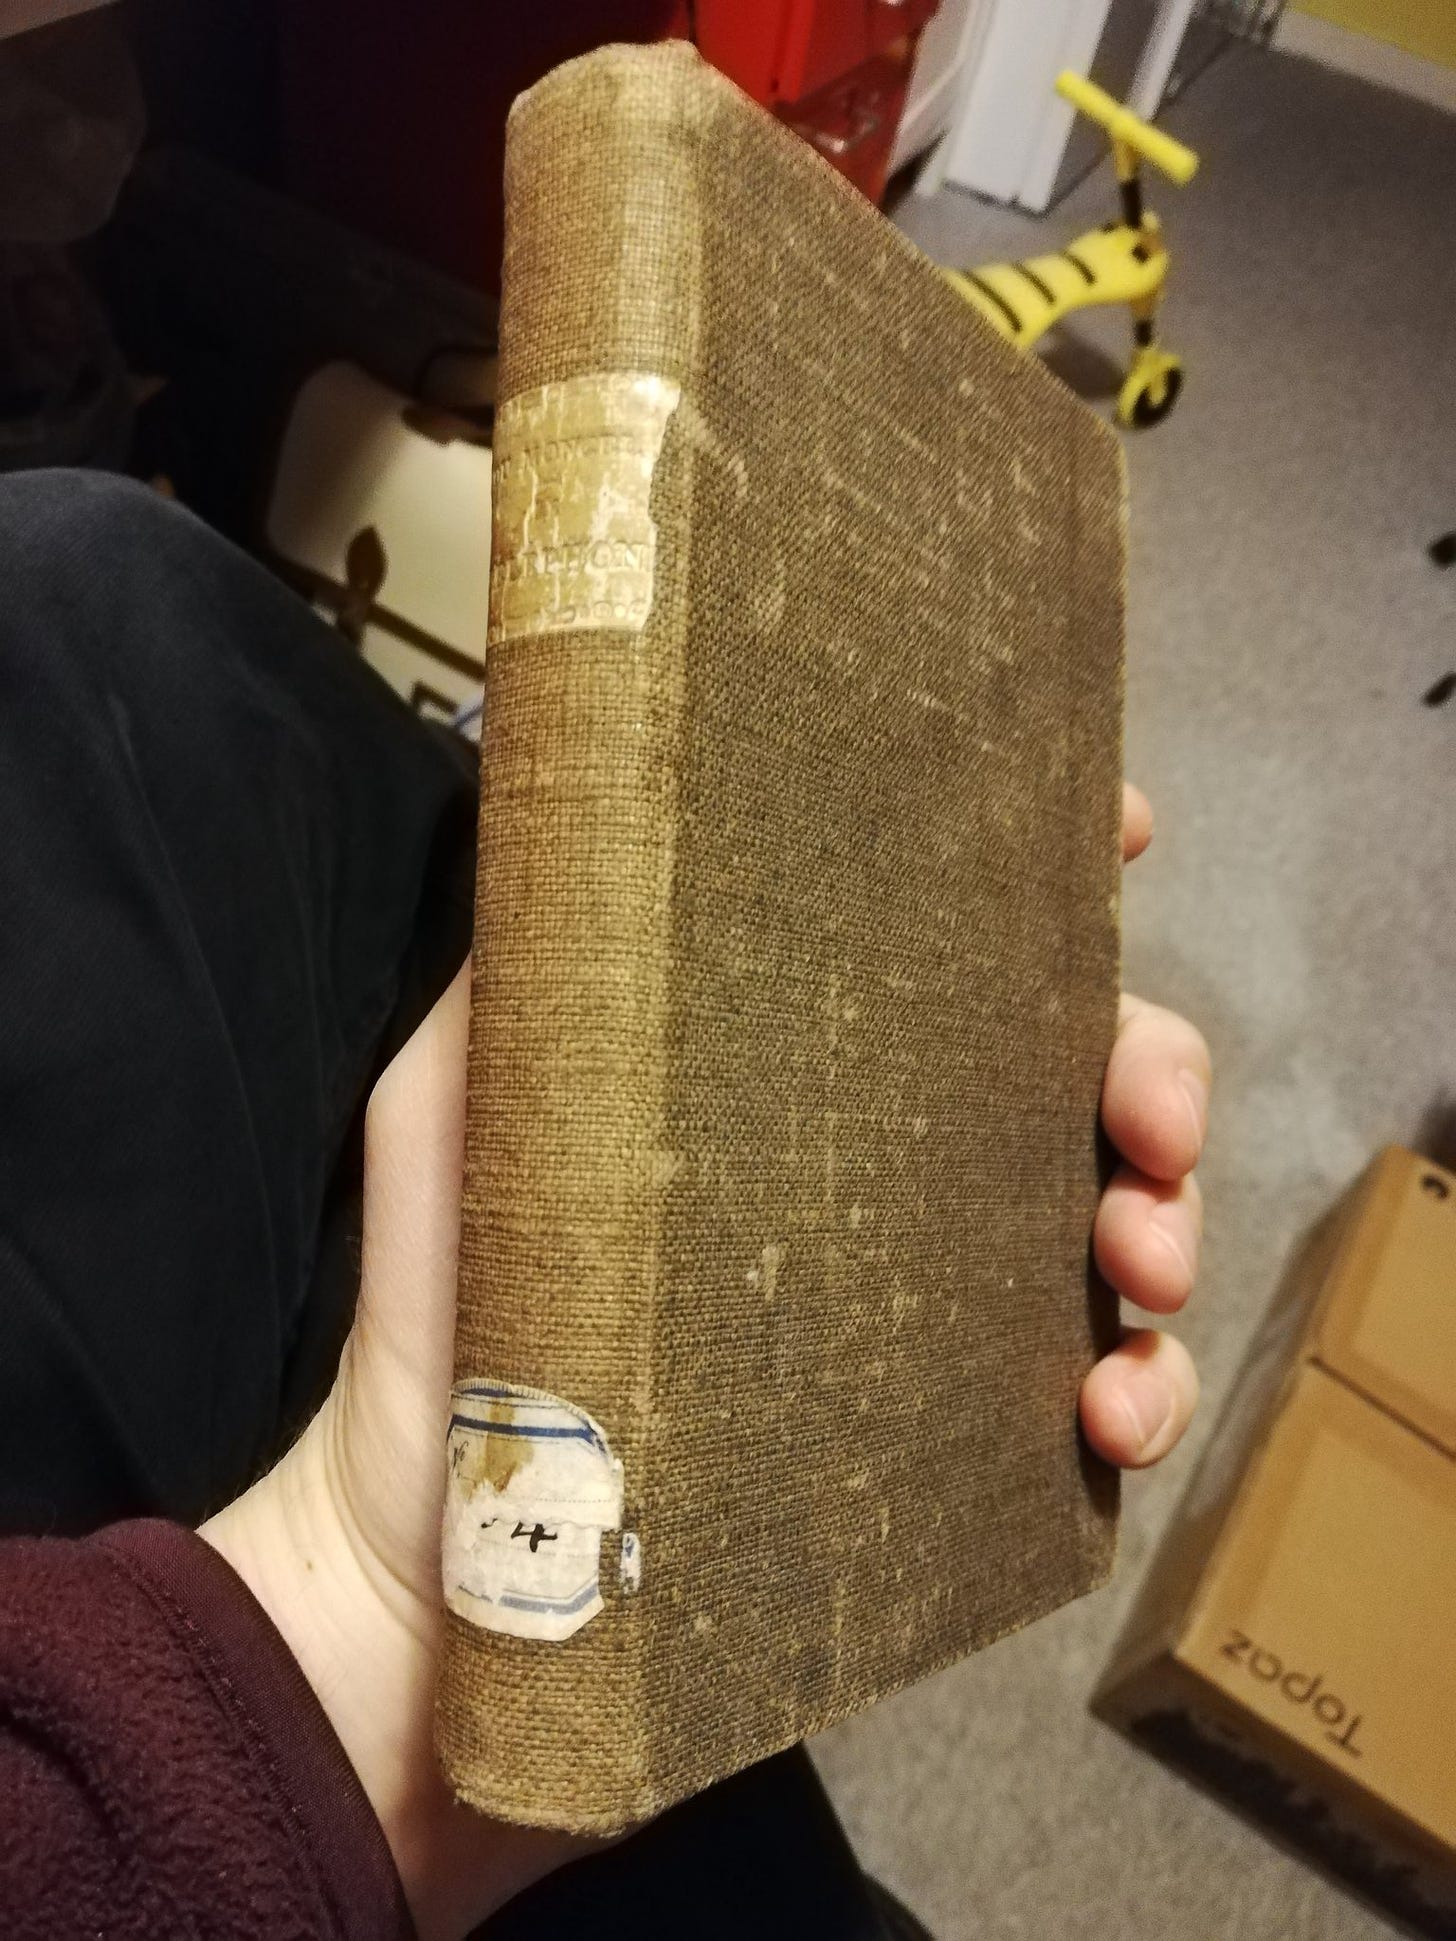 Second edition copy of Le Telephone, Le Microphone et Le Phonographe by Le Comte Th. Du Moncel (1880). A yellowing hardback book, in medium condition.